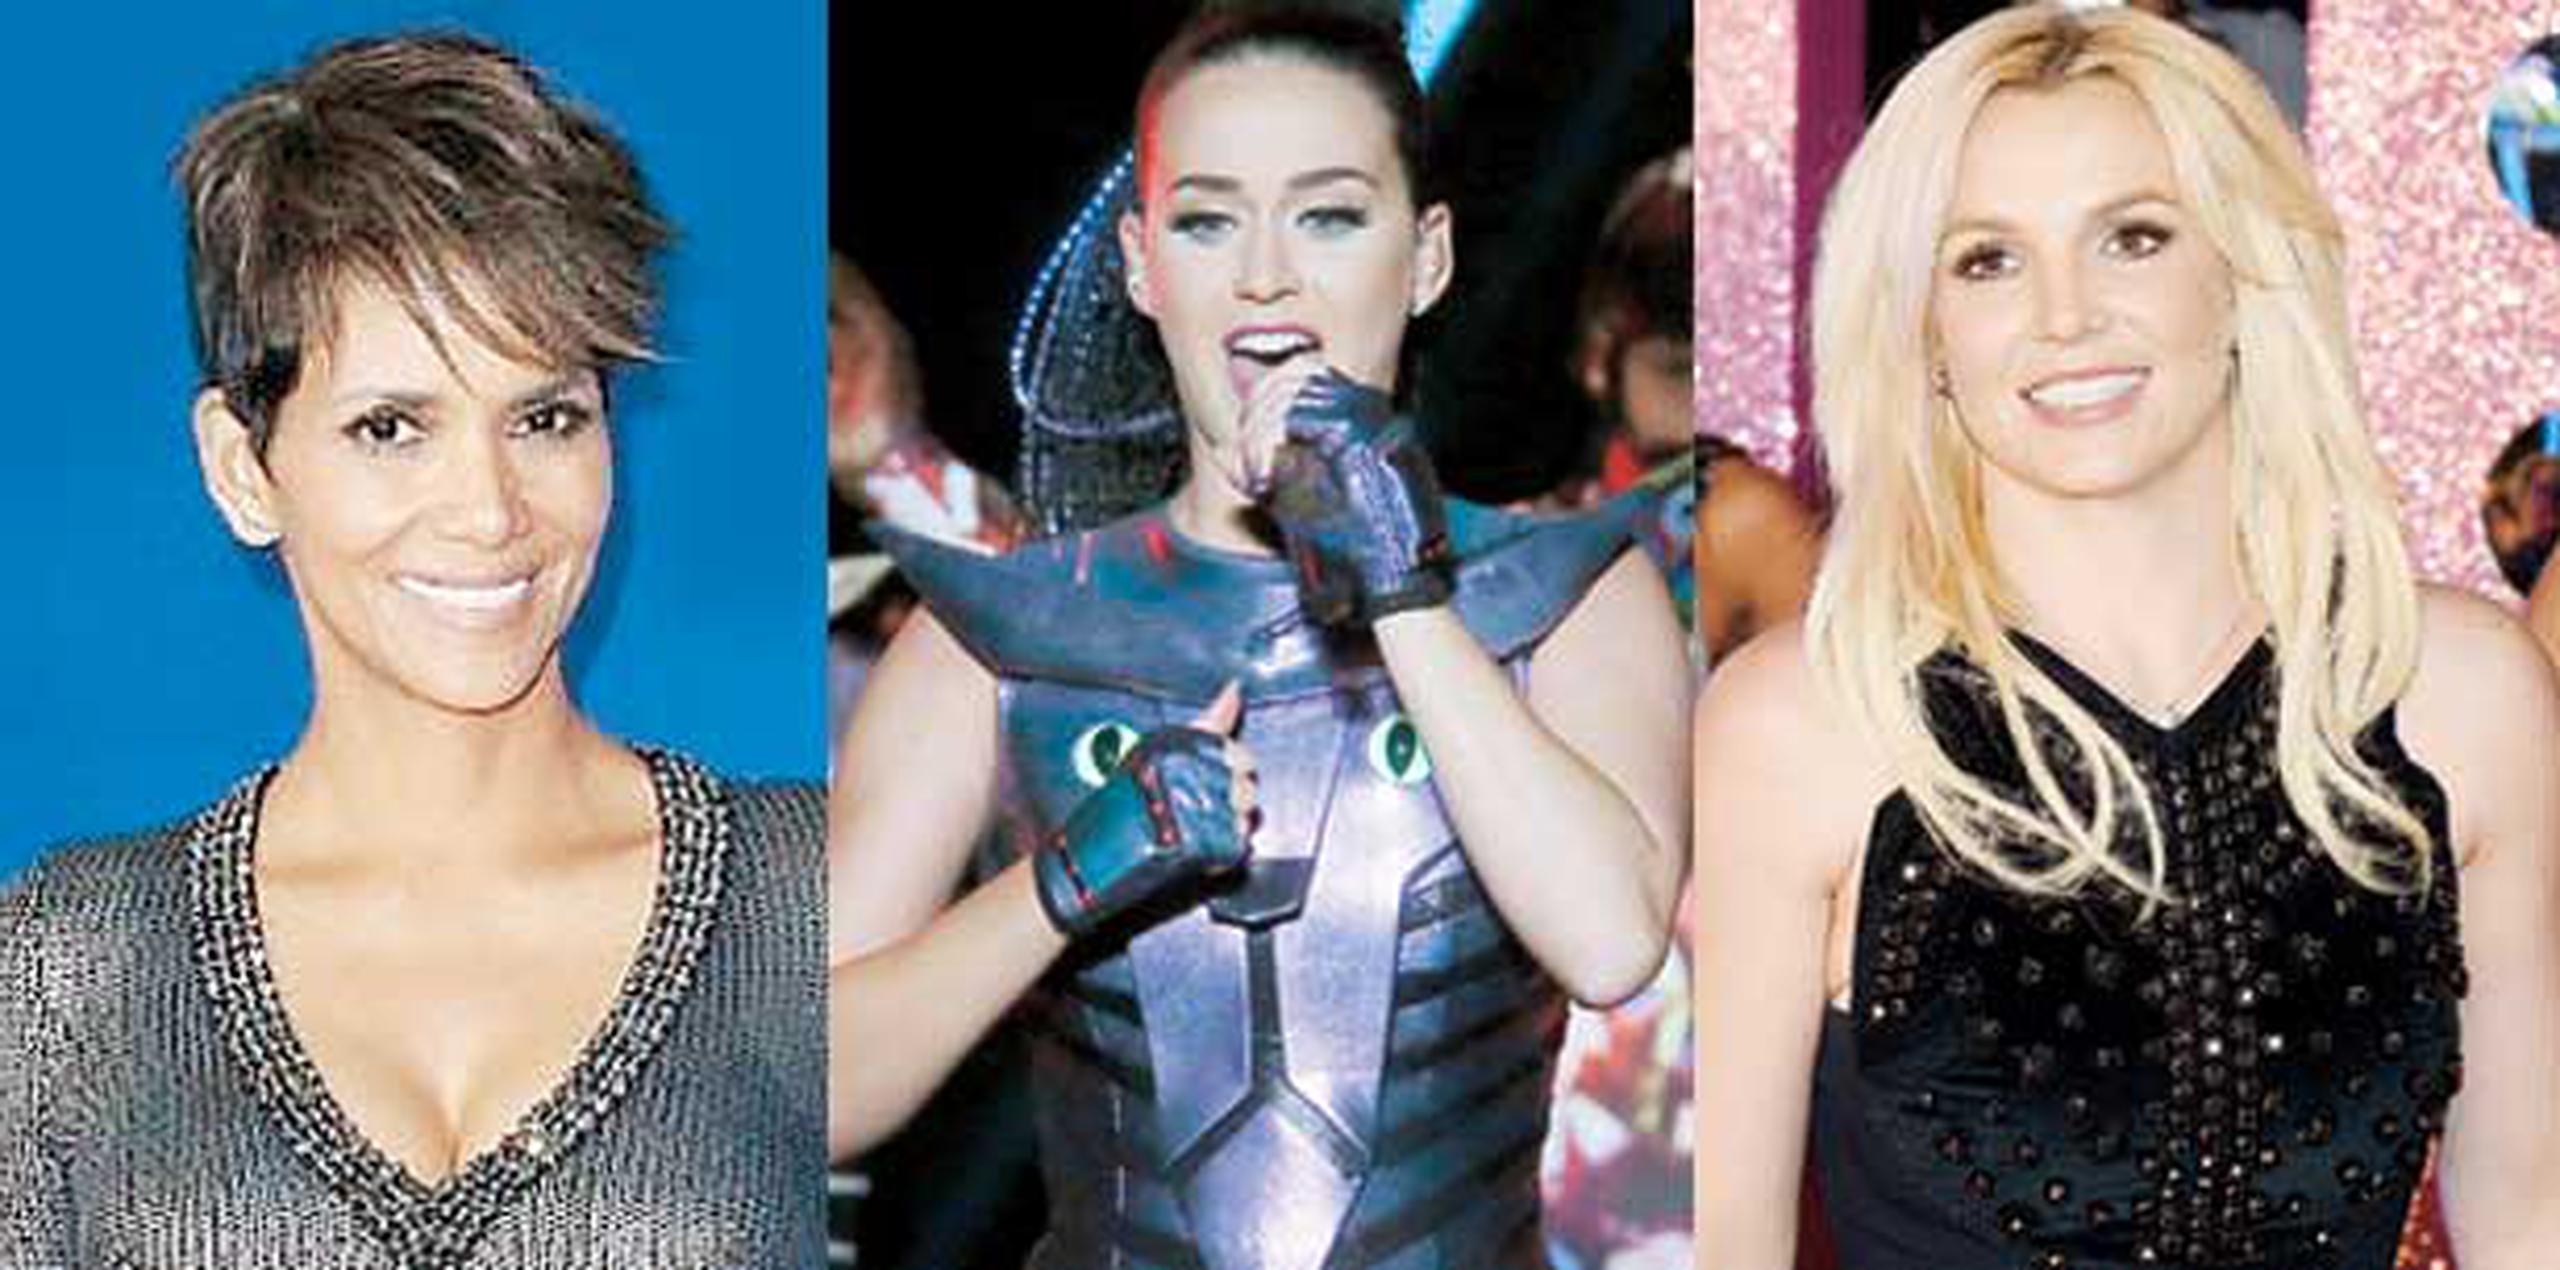 Halle Berry, Katy Perry y Britney Spears (Archivo)